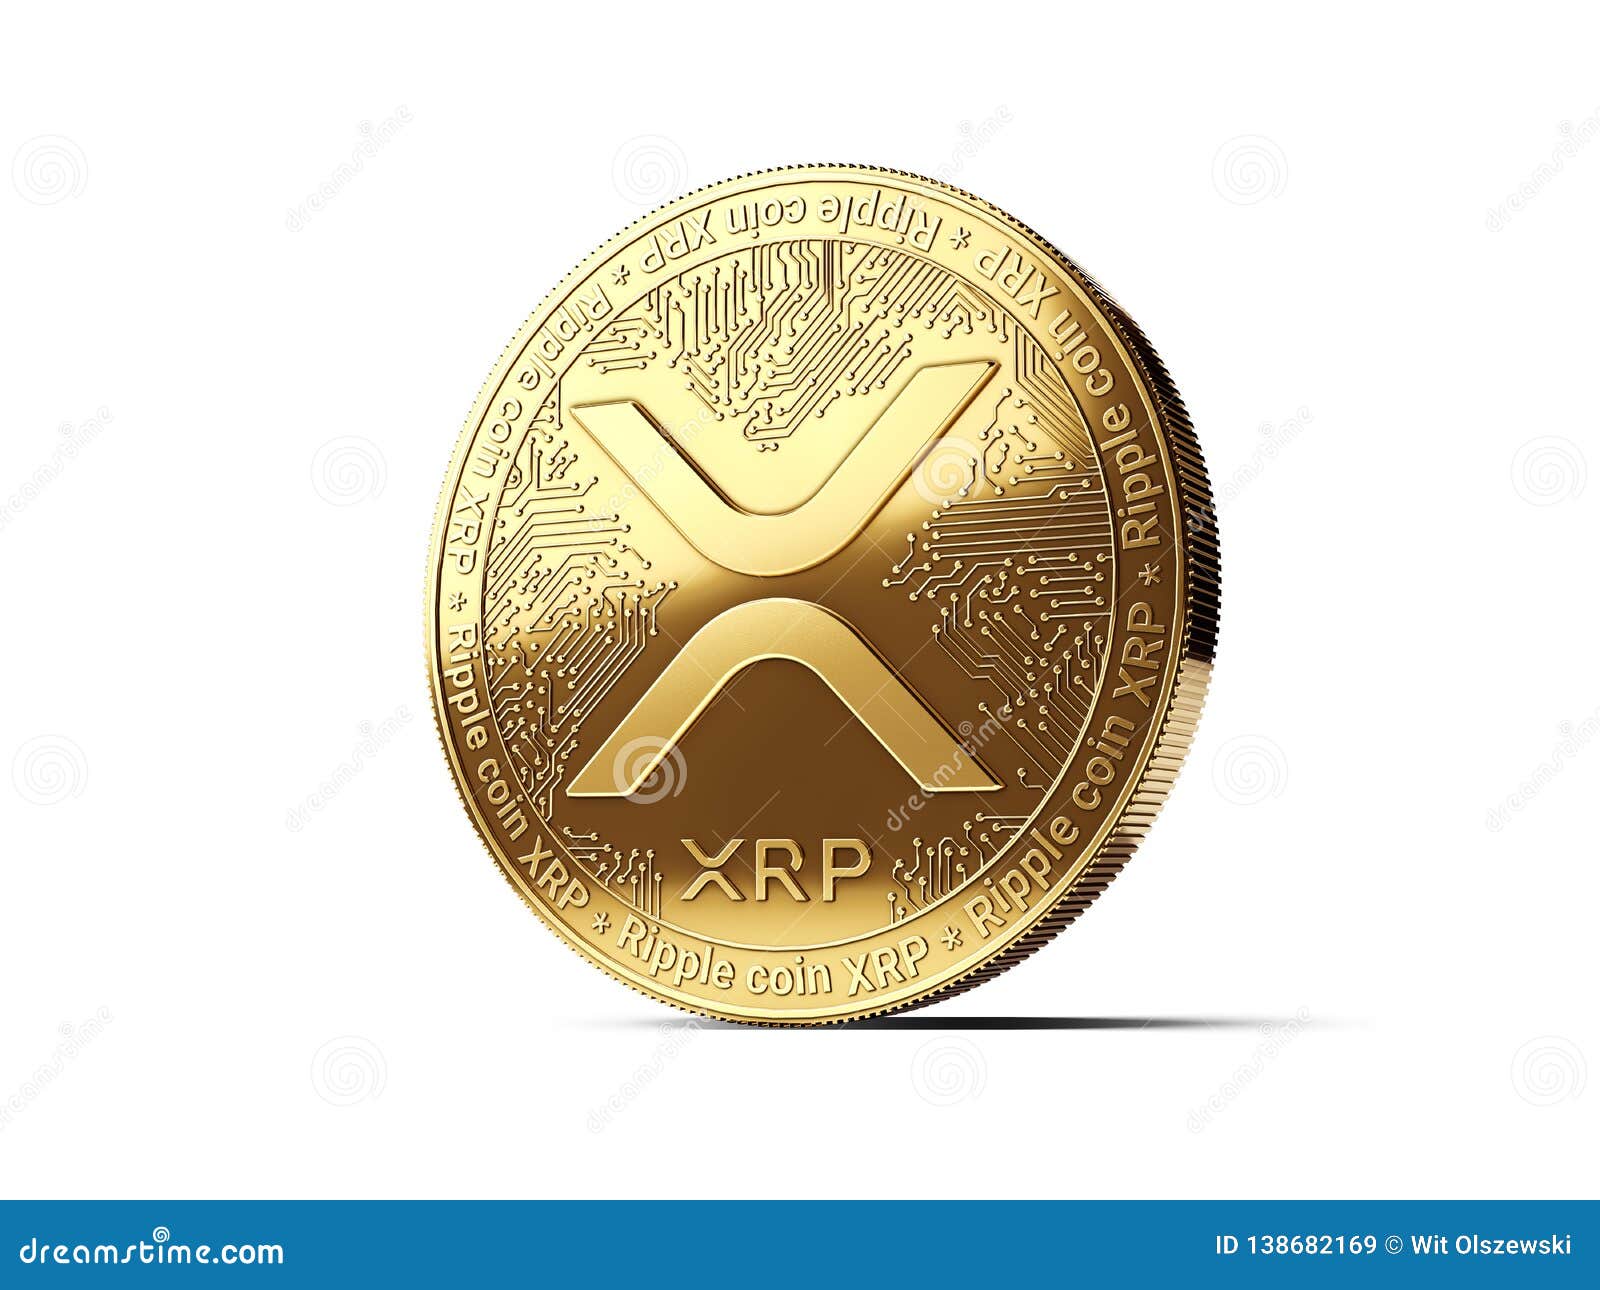 crypto currency xrp